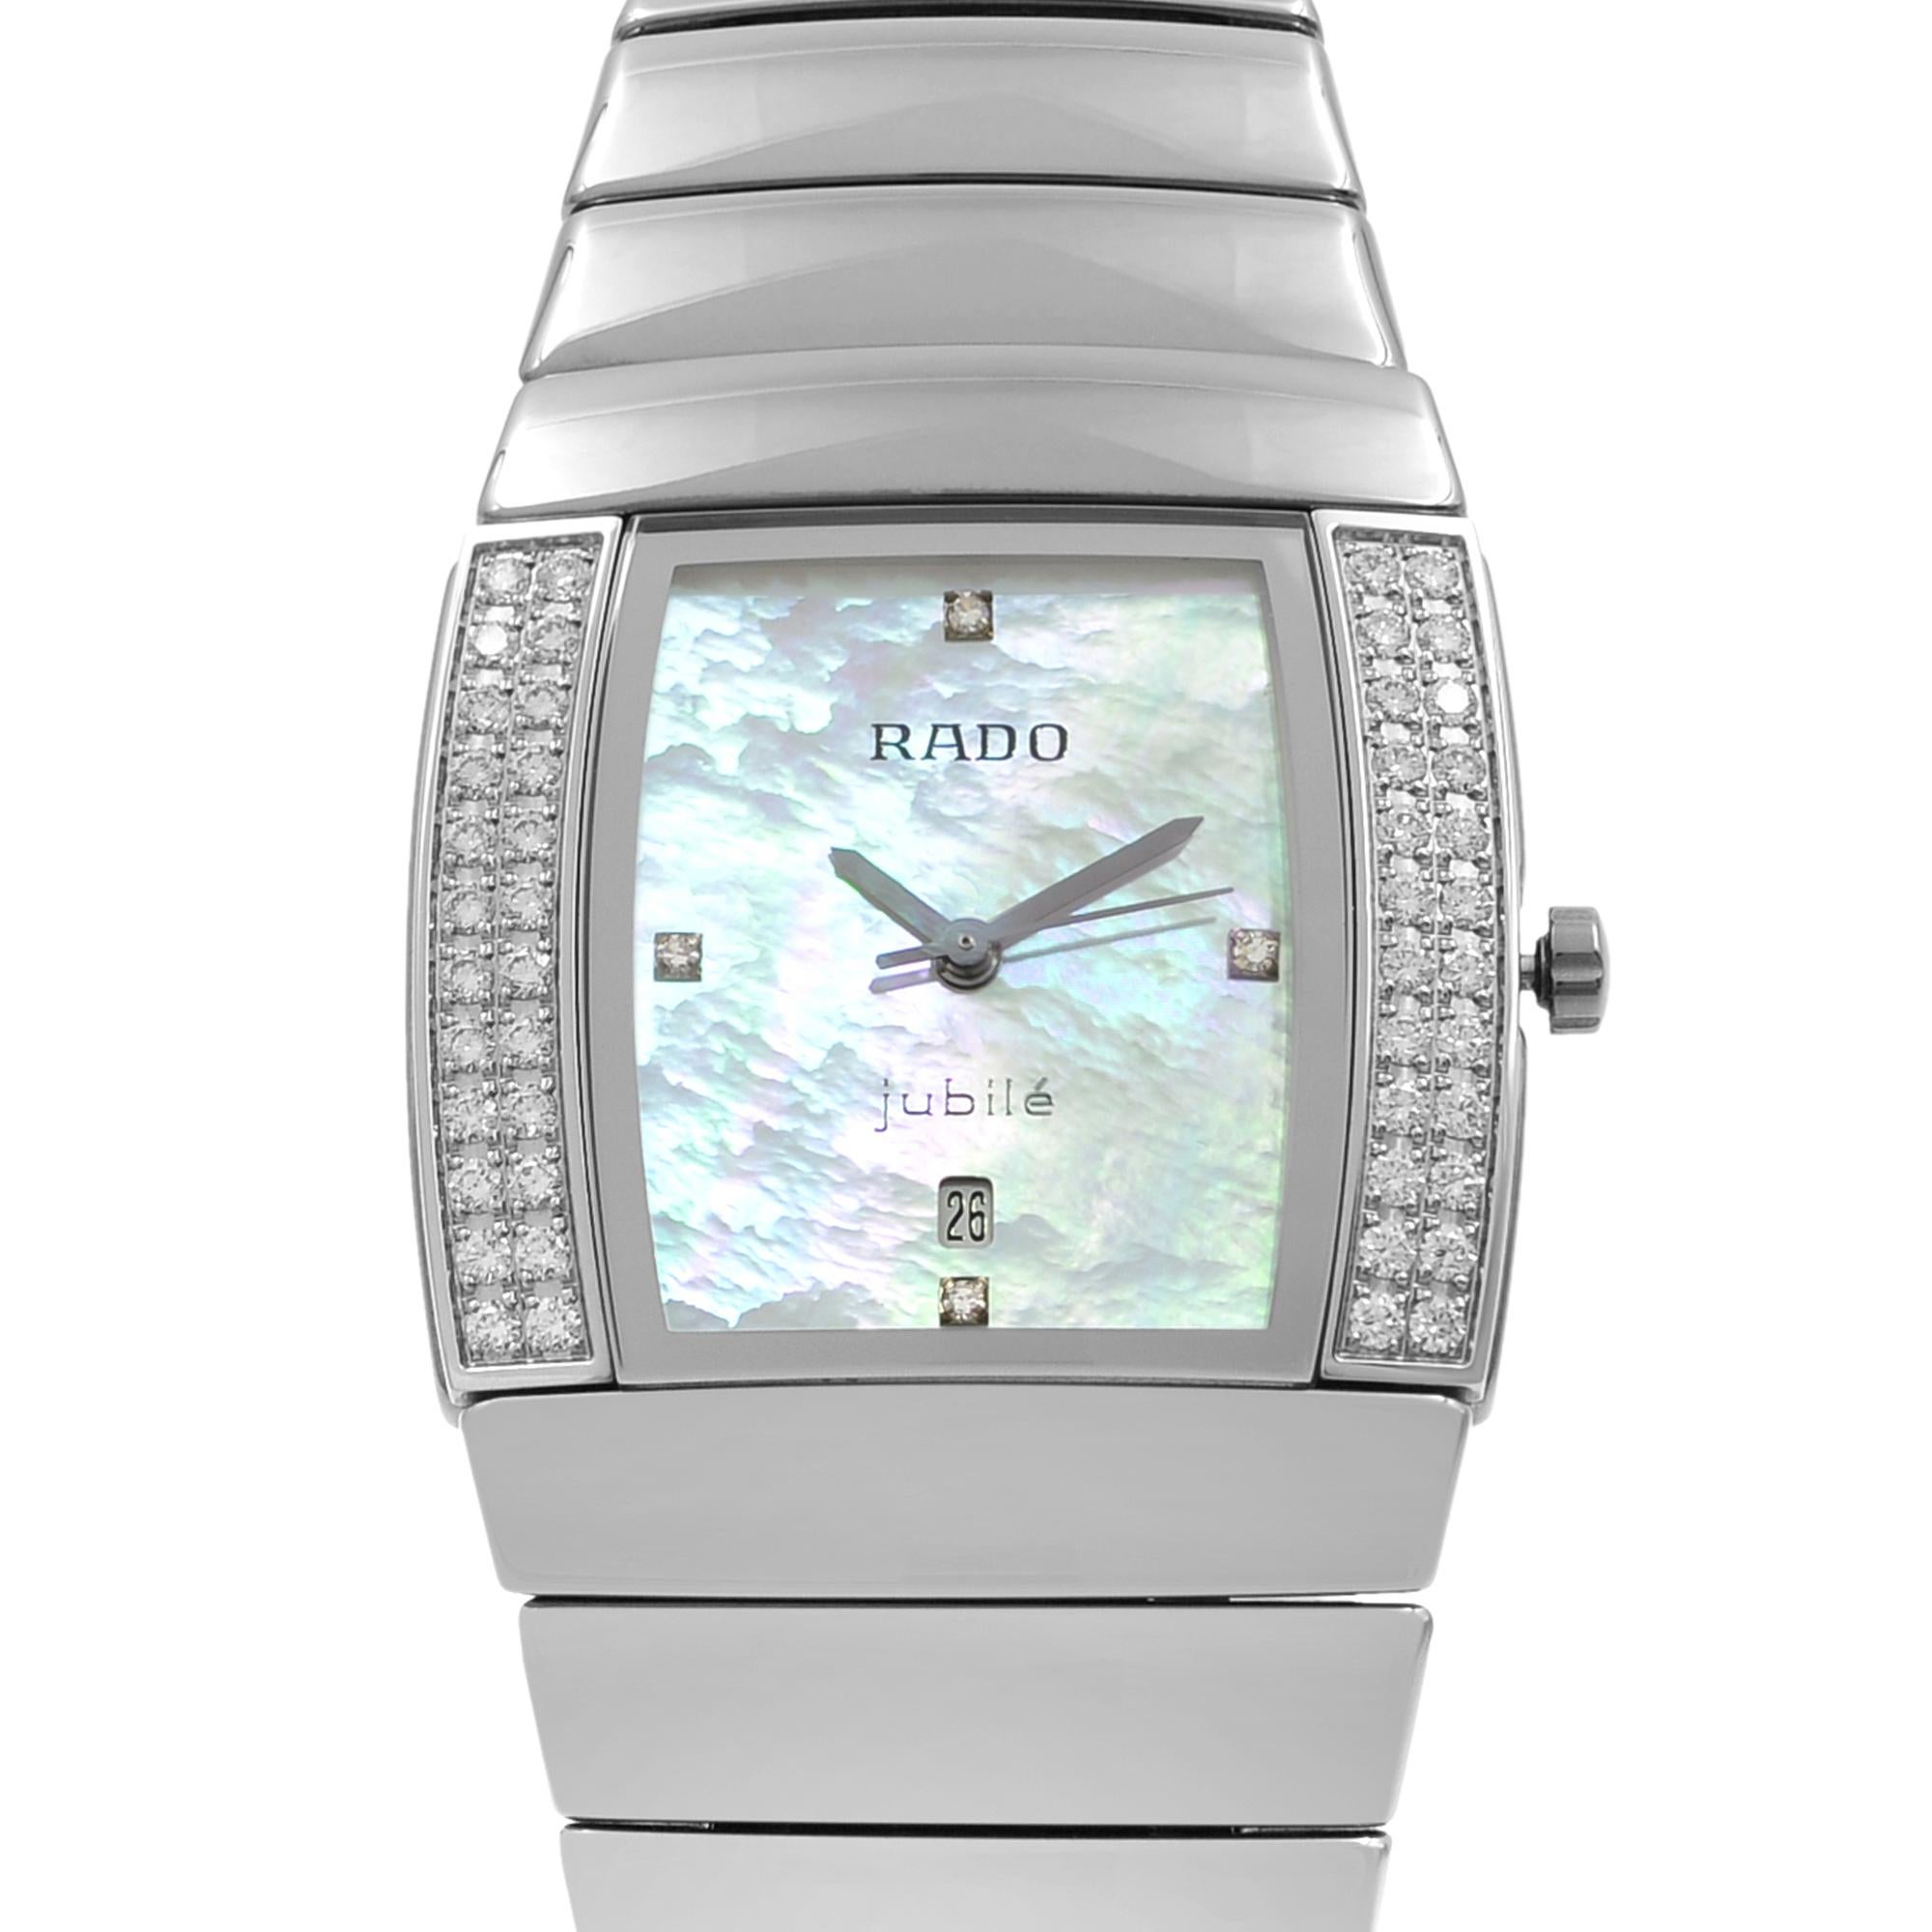 This brand new Rado Sintra R13577902 is a beautiful Ladies timepiece that is powered by a quartz movement which is cased in a ceramic case. It has a round shape face, date, diamonds dial and has hand diamonds, unspecified style markers. It is